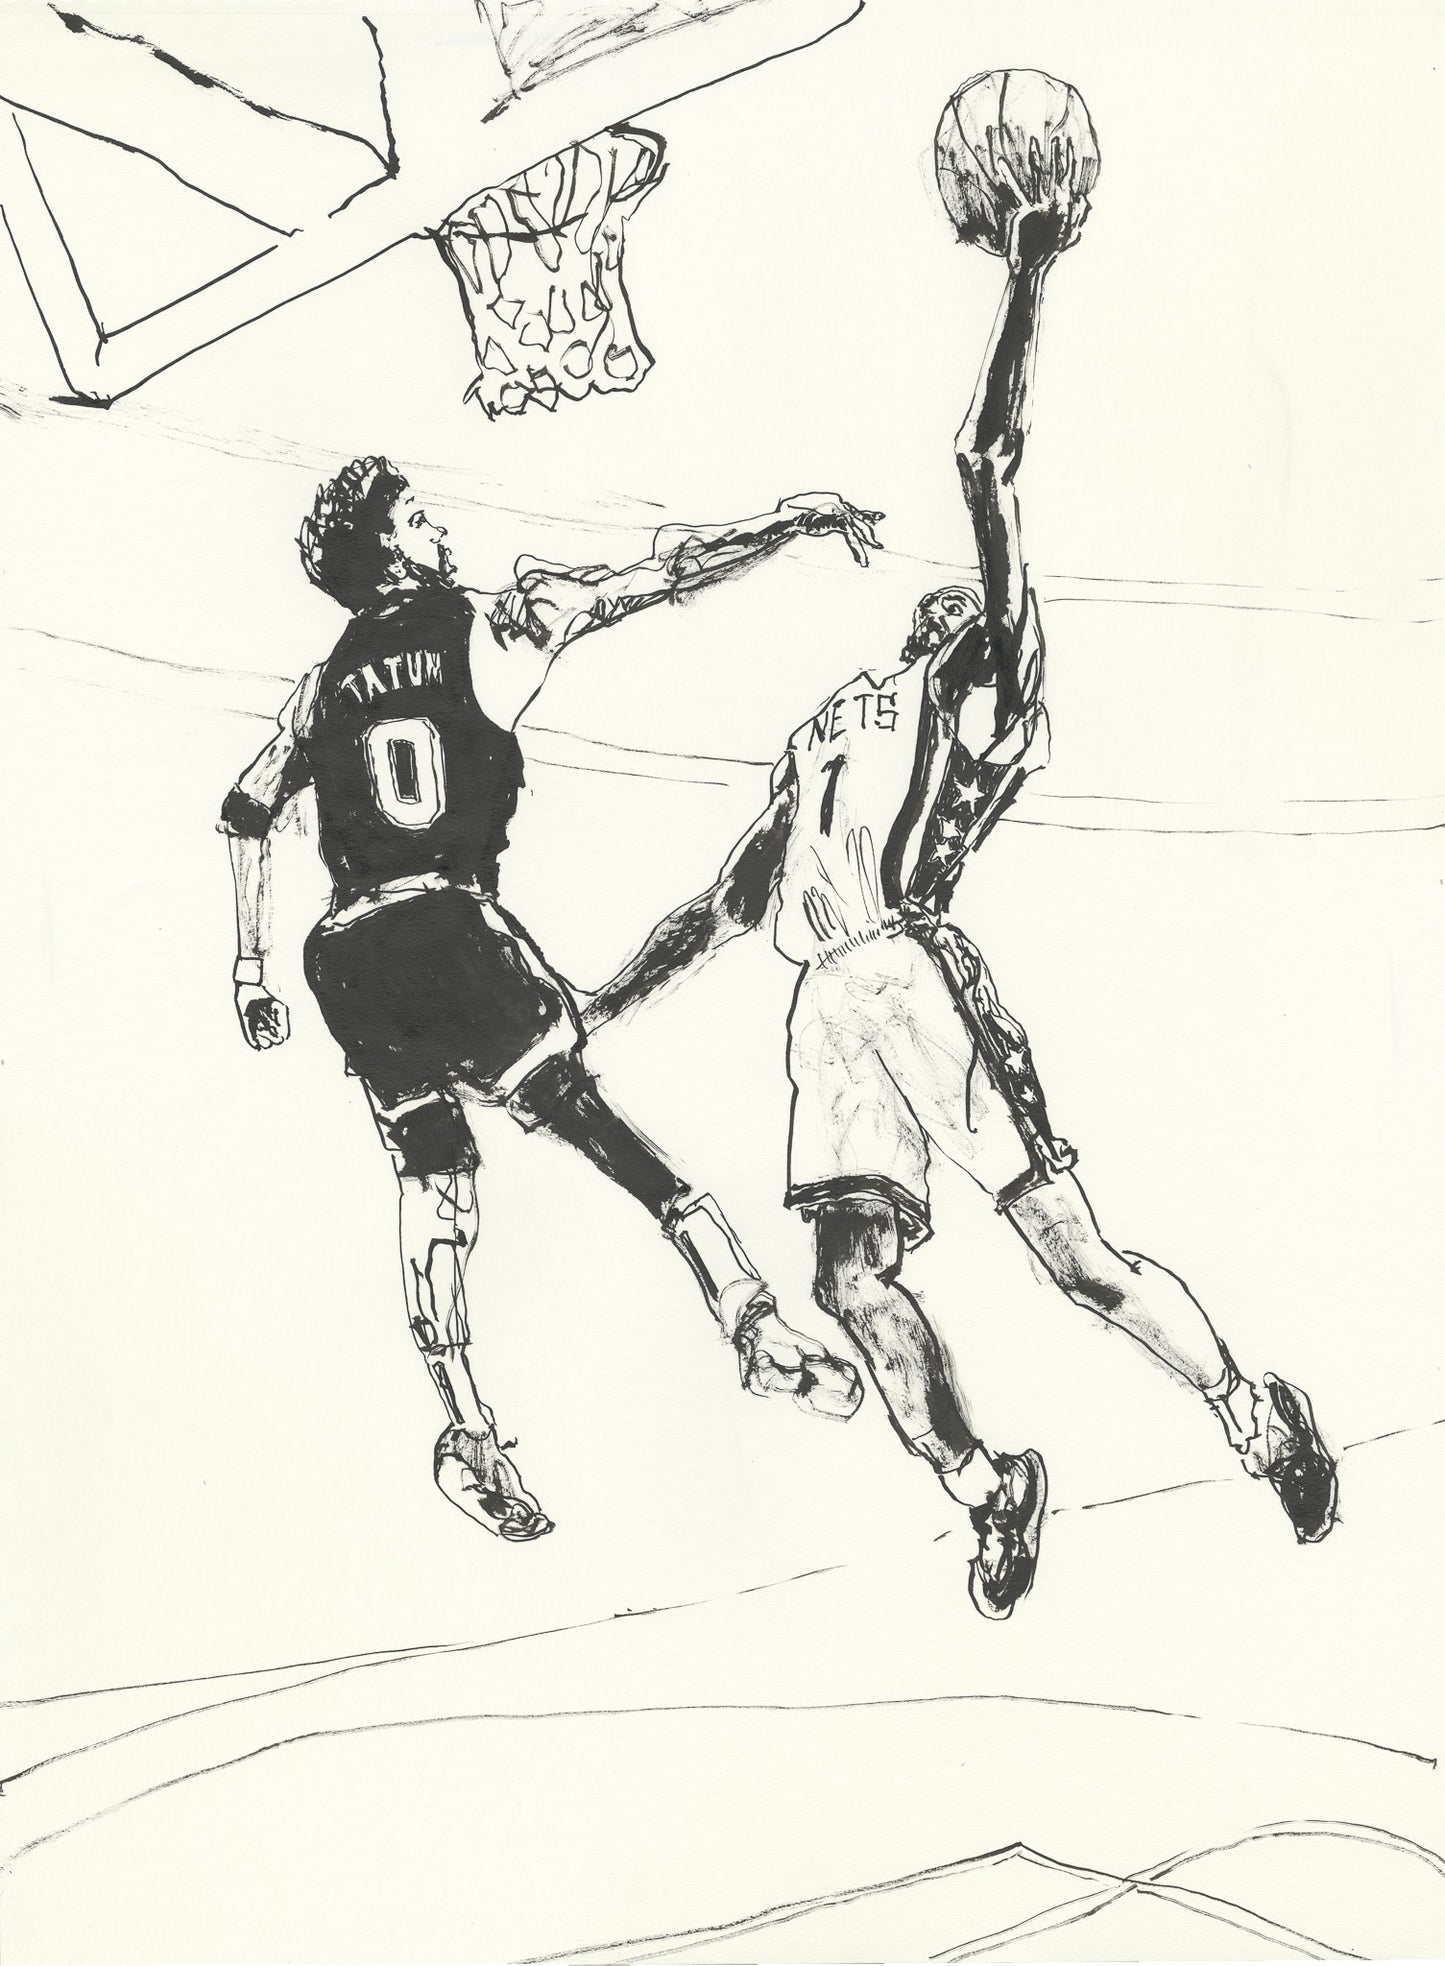 Bridges over Tatum - Drawing of the Game - Nets win over Celtics in Epic Comeback